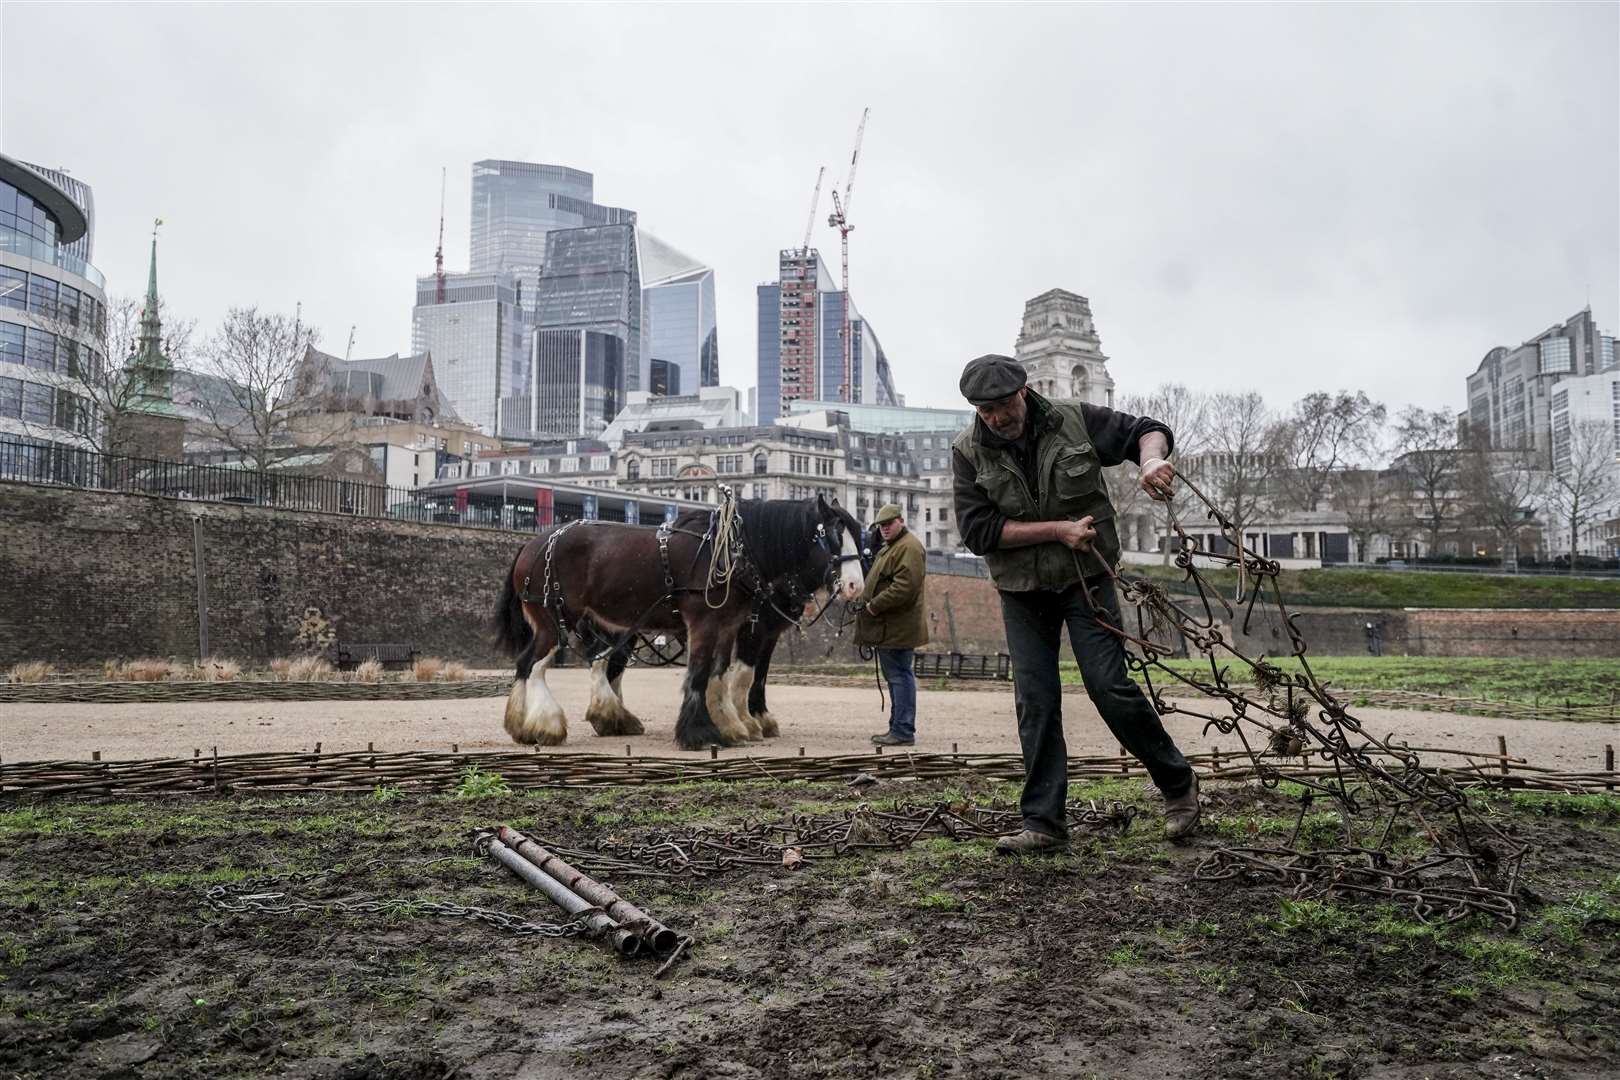 Shire horses called William and Joey from Hampton Court Palace, plough the moat at the Tower of London (Jordan Pettitt/PA)